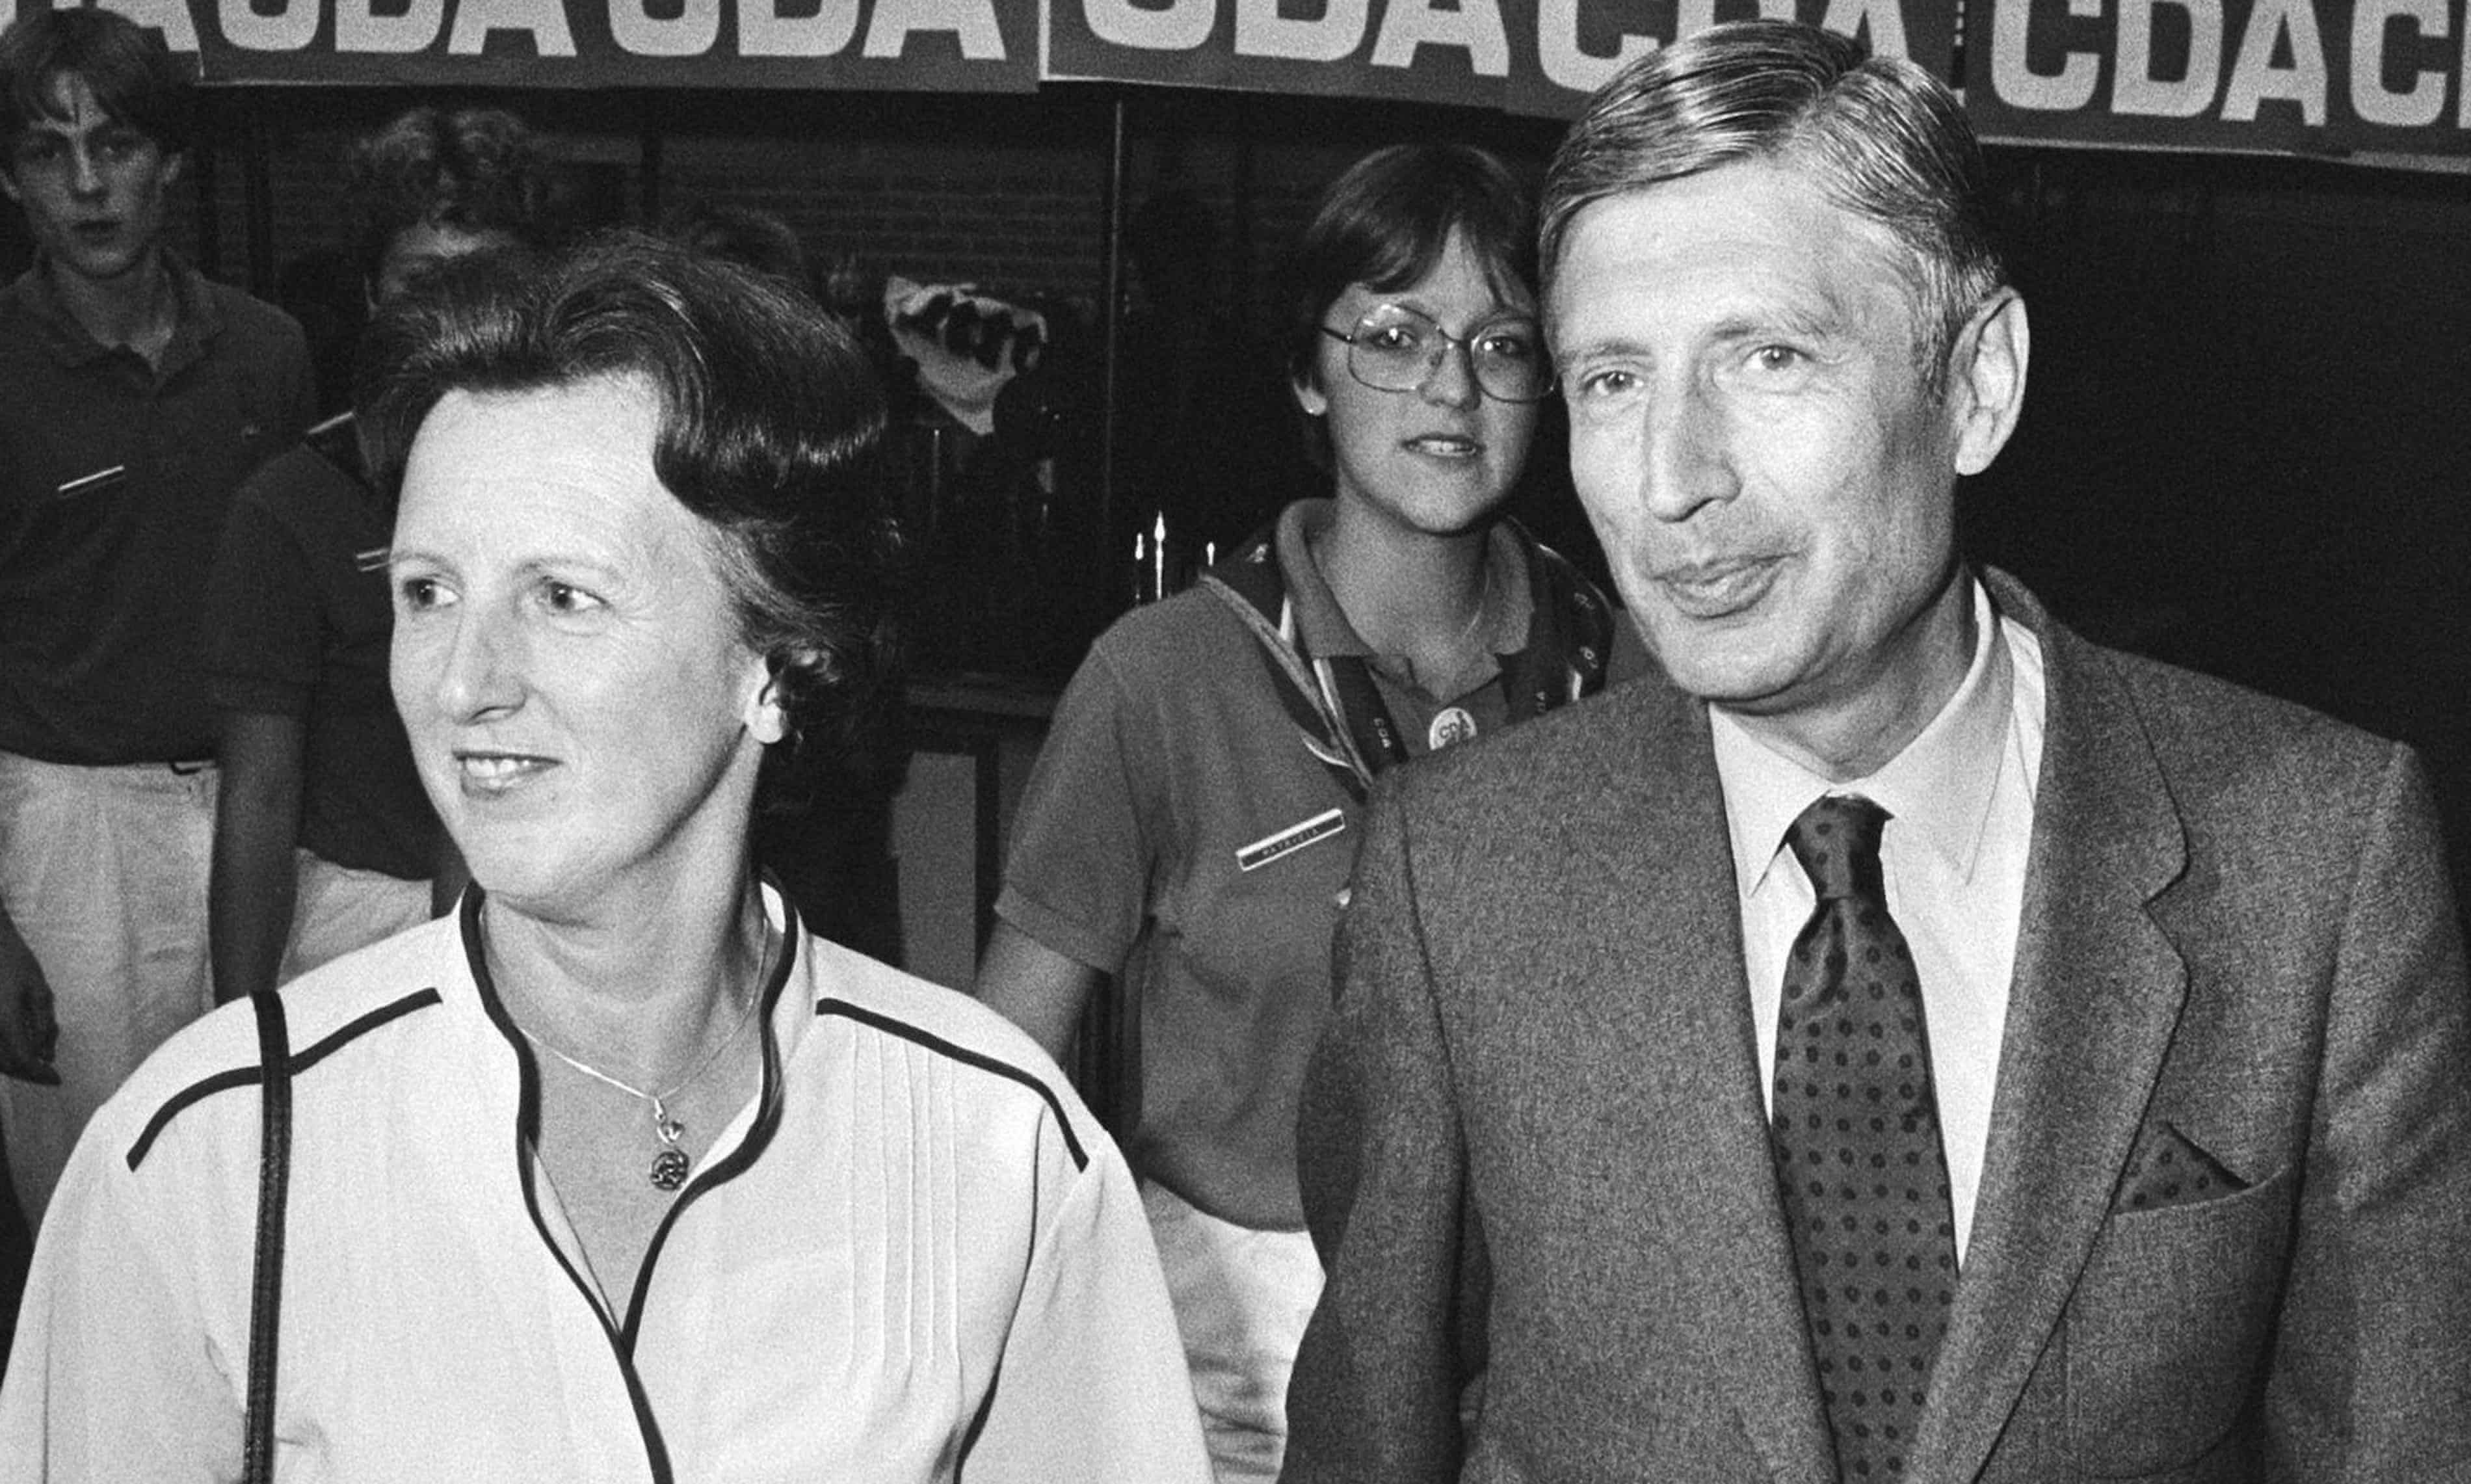 Duo euthanasia: former Dutch prime minister dies hand in hand with his wife (theguardian.com)